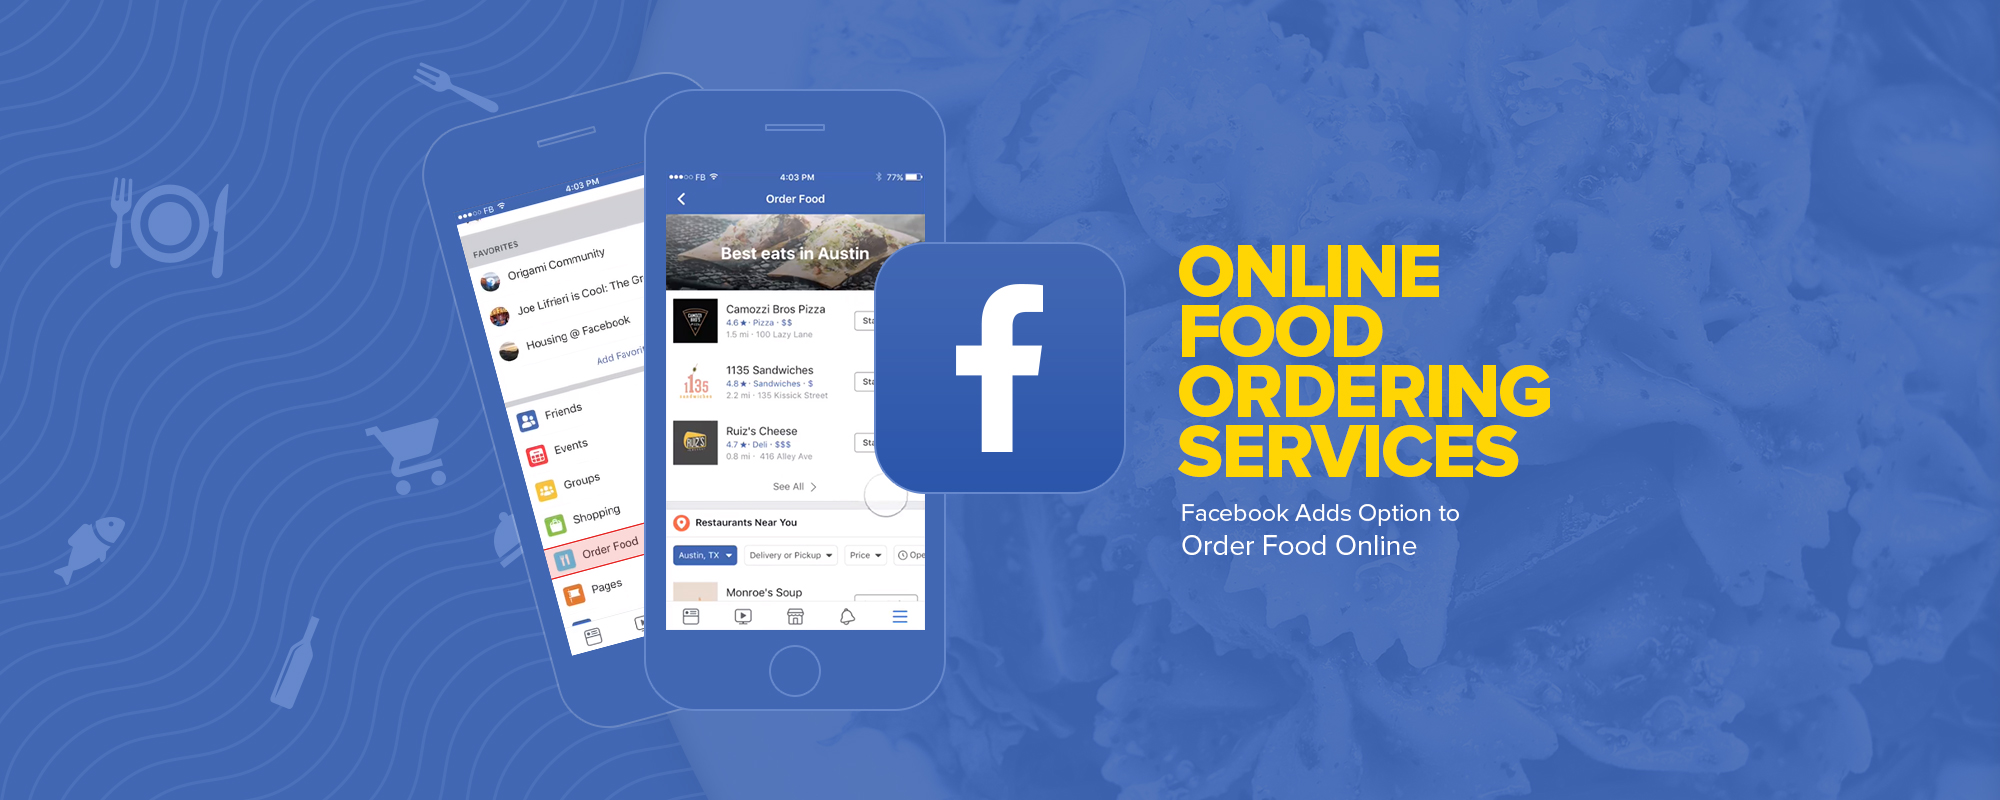 Online Food Ordering Services Now Available On Facebook